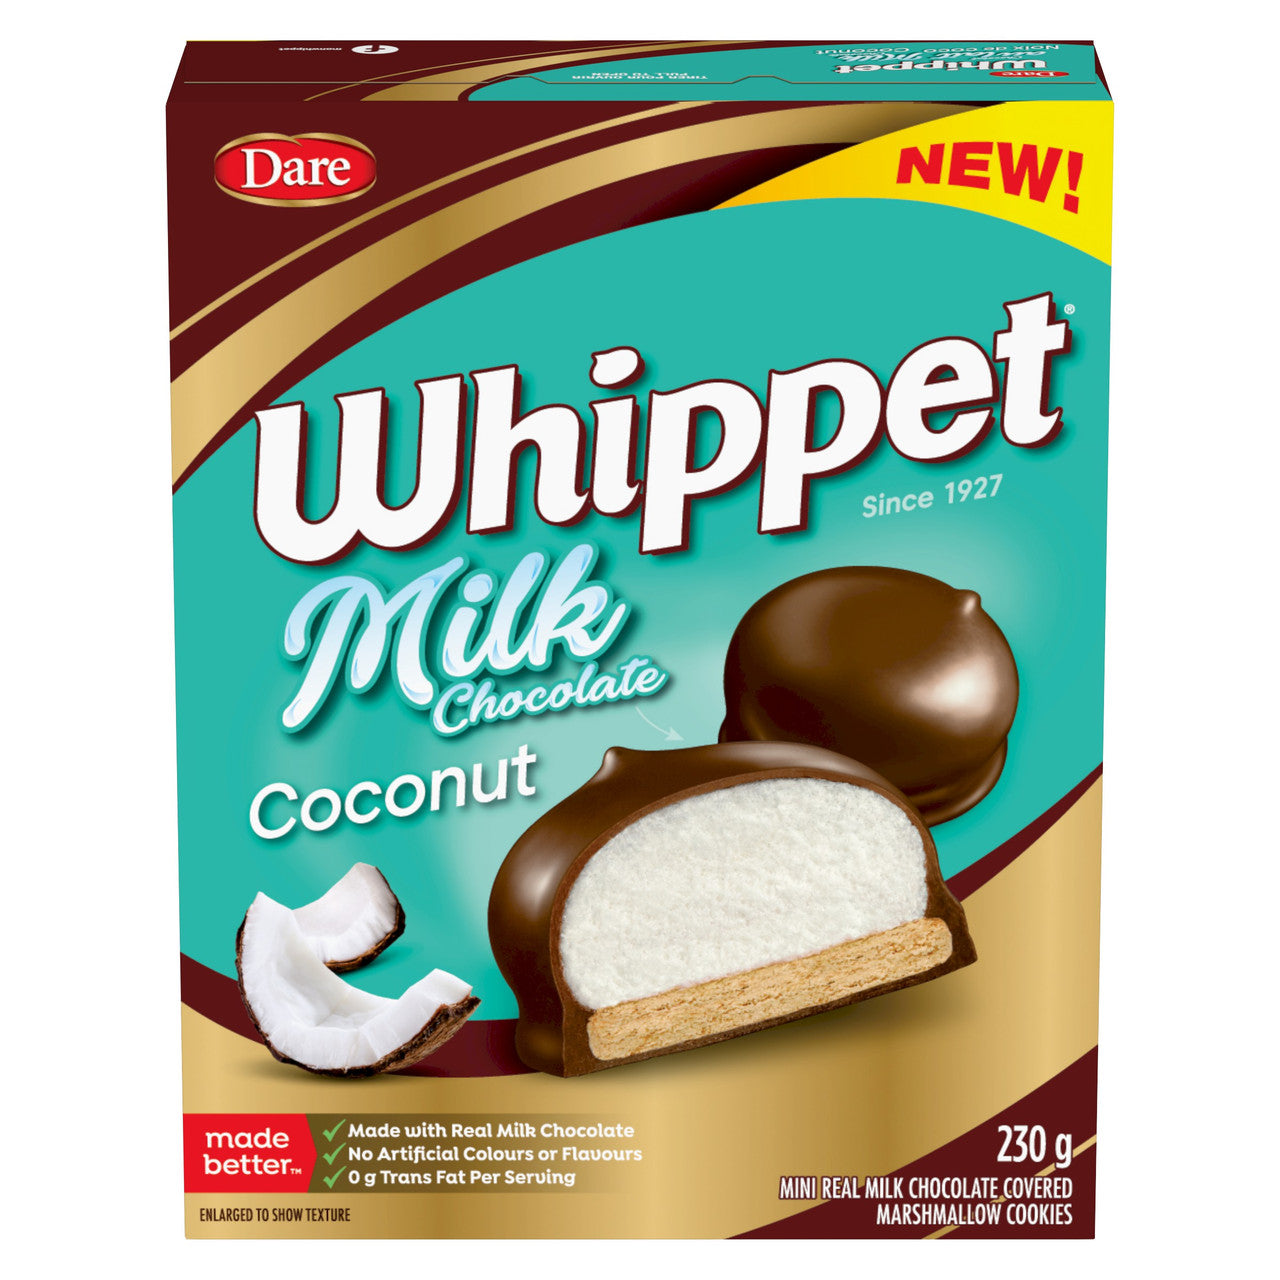 Dare Whippet Milk Chocolate Coconut Cookies, 230g/8.75 oz., 1 Box, {Imported from Canada}